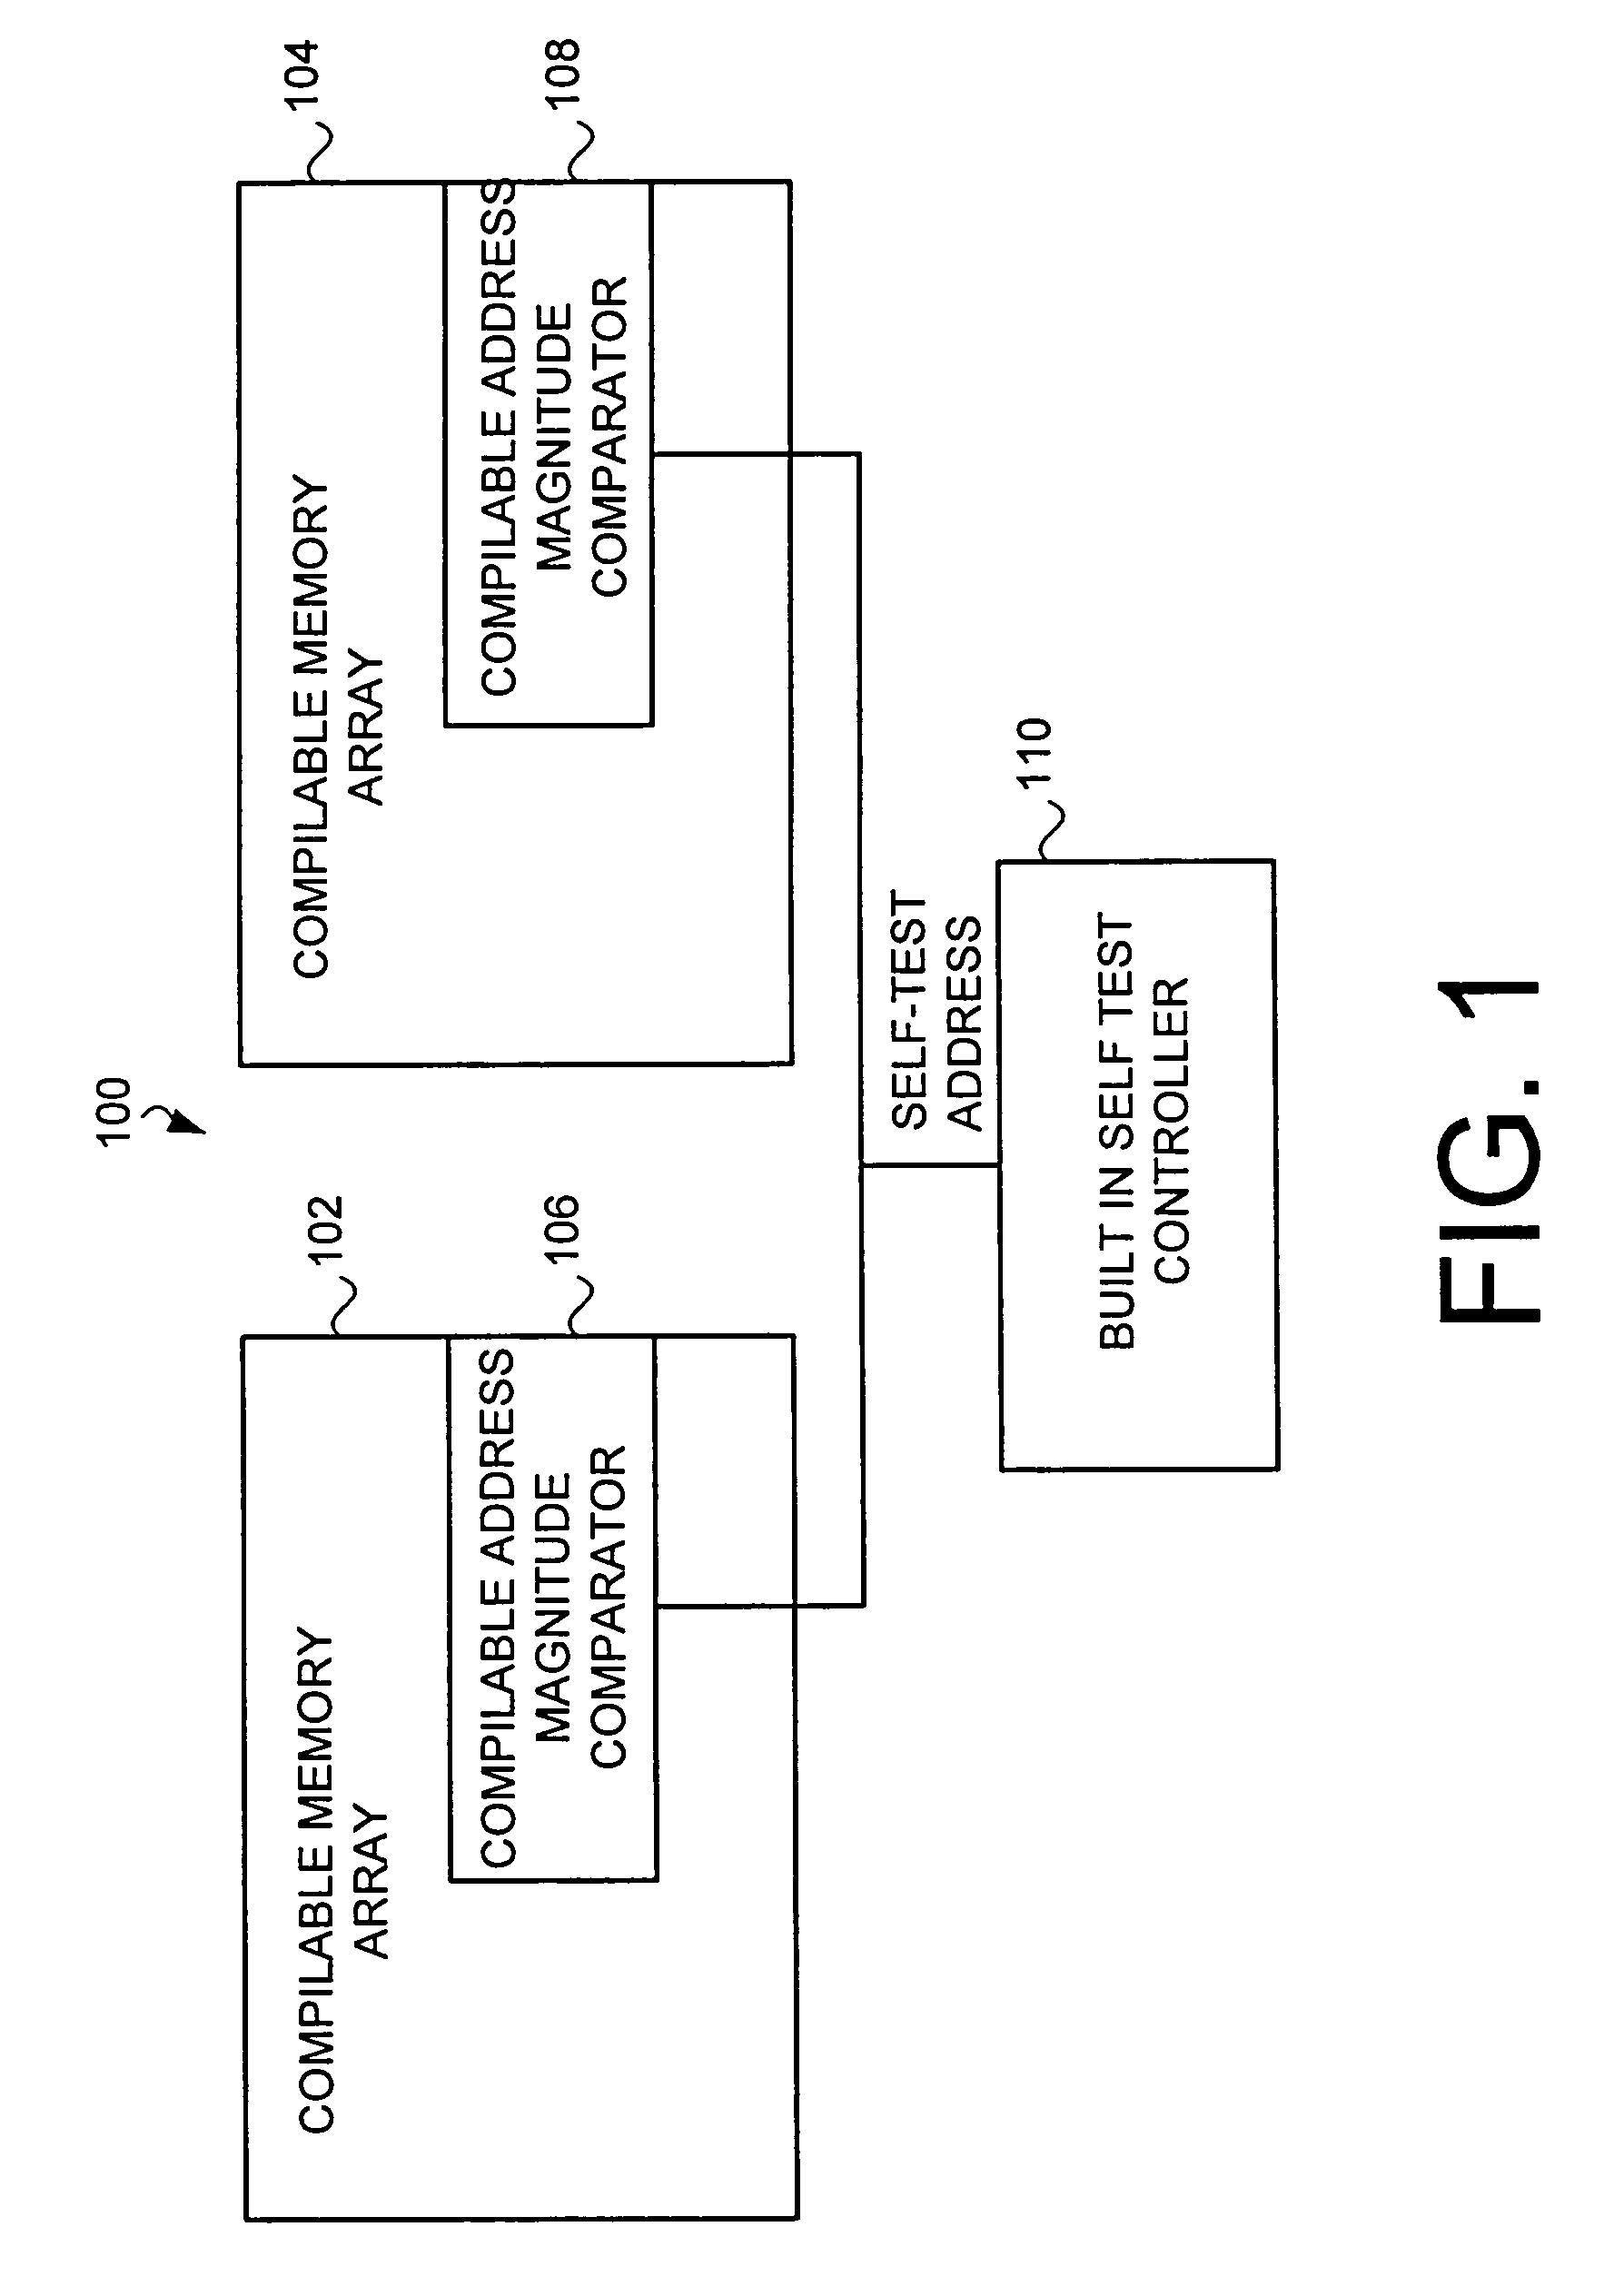 Compilable address magnitude comparator for memory array self-testing